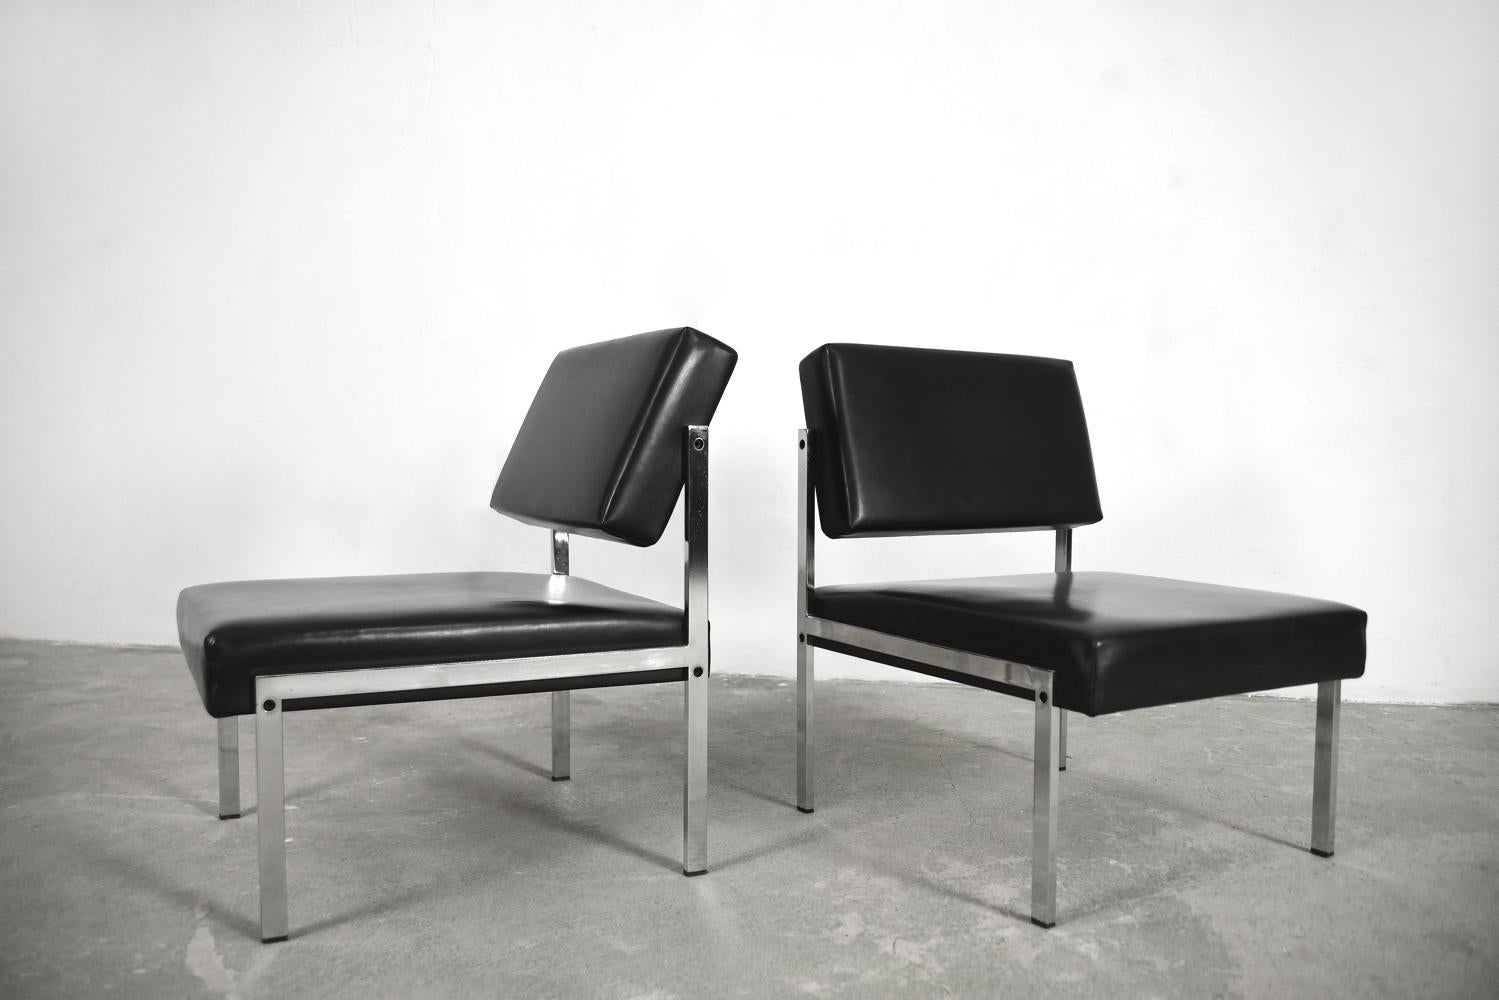 Minimalist German Chrome and Leather Modular Lounge Chairs from Brune, 1960s For Sale 10